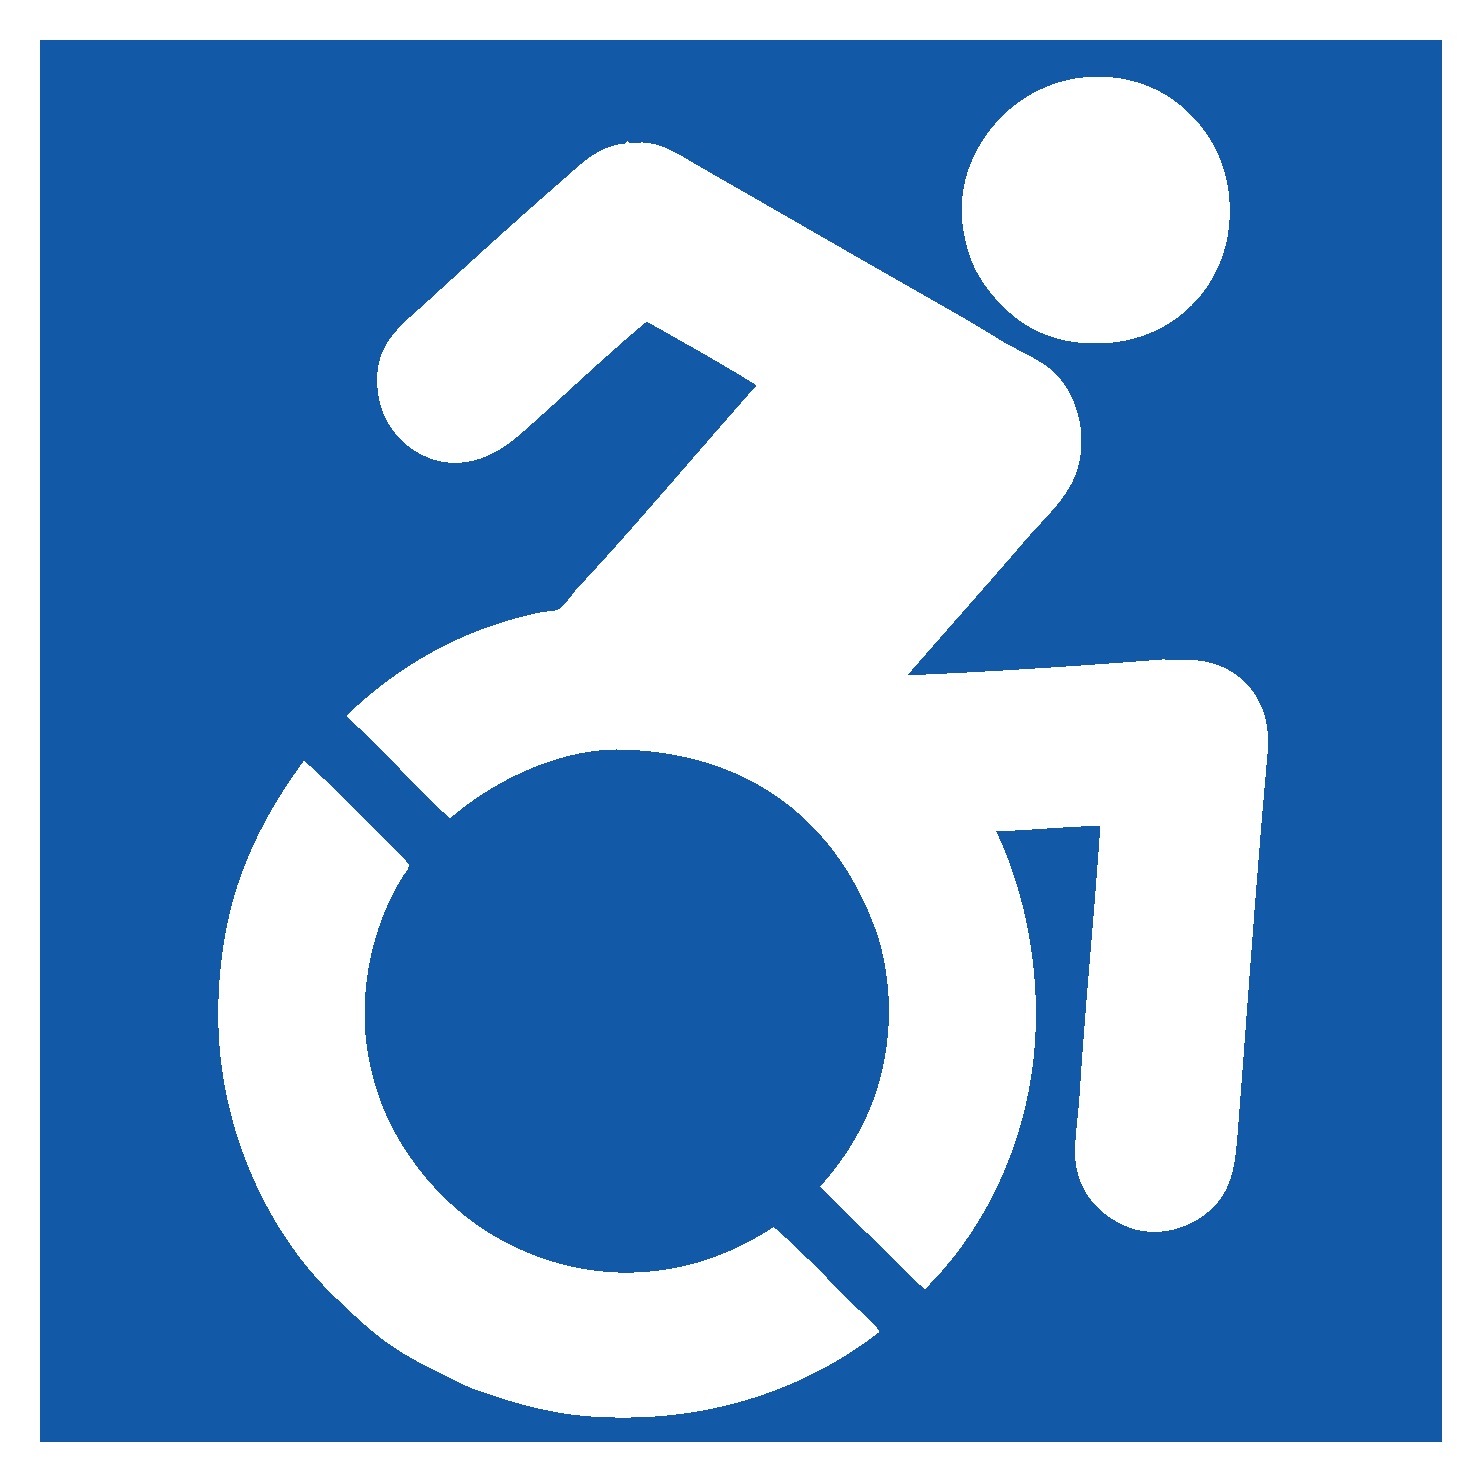 Disability icons | Noun Project